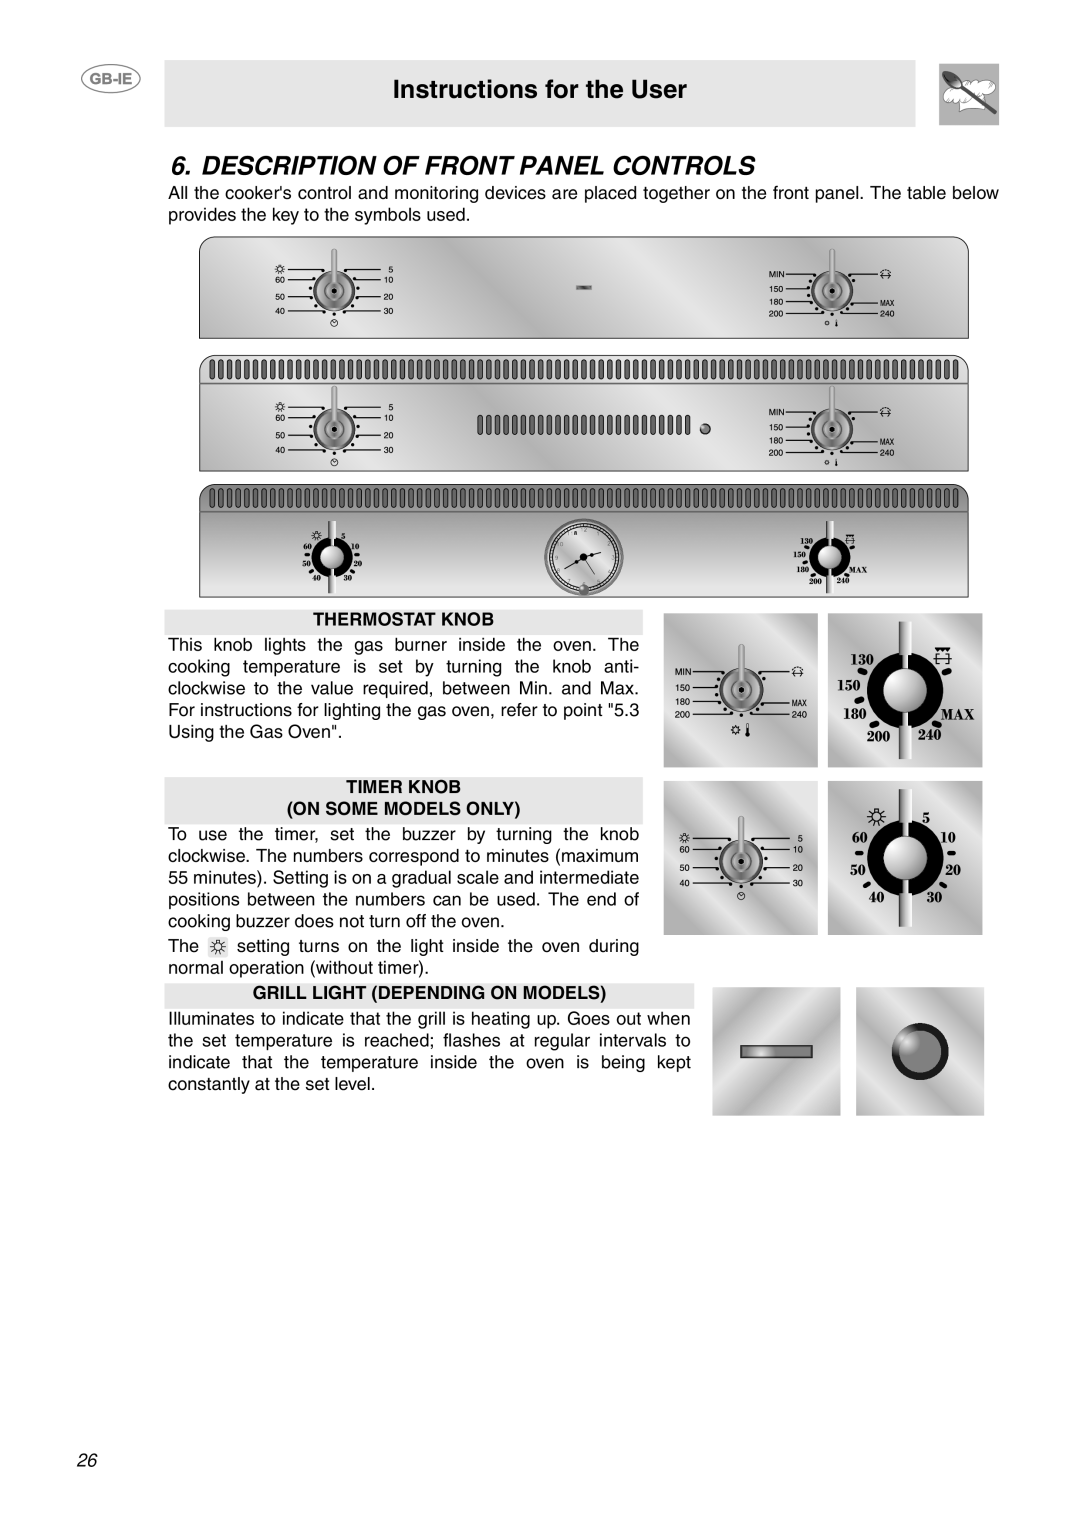 Smeg S340G manual Instructions for the User, Description Of Front Panel Controls 